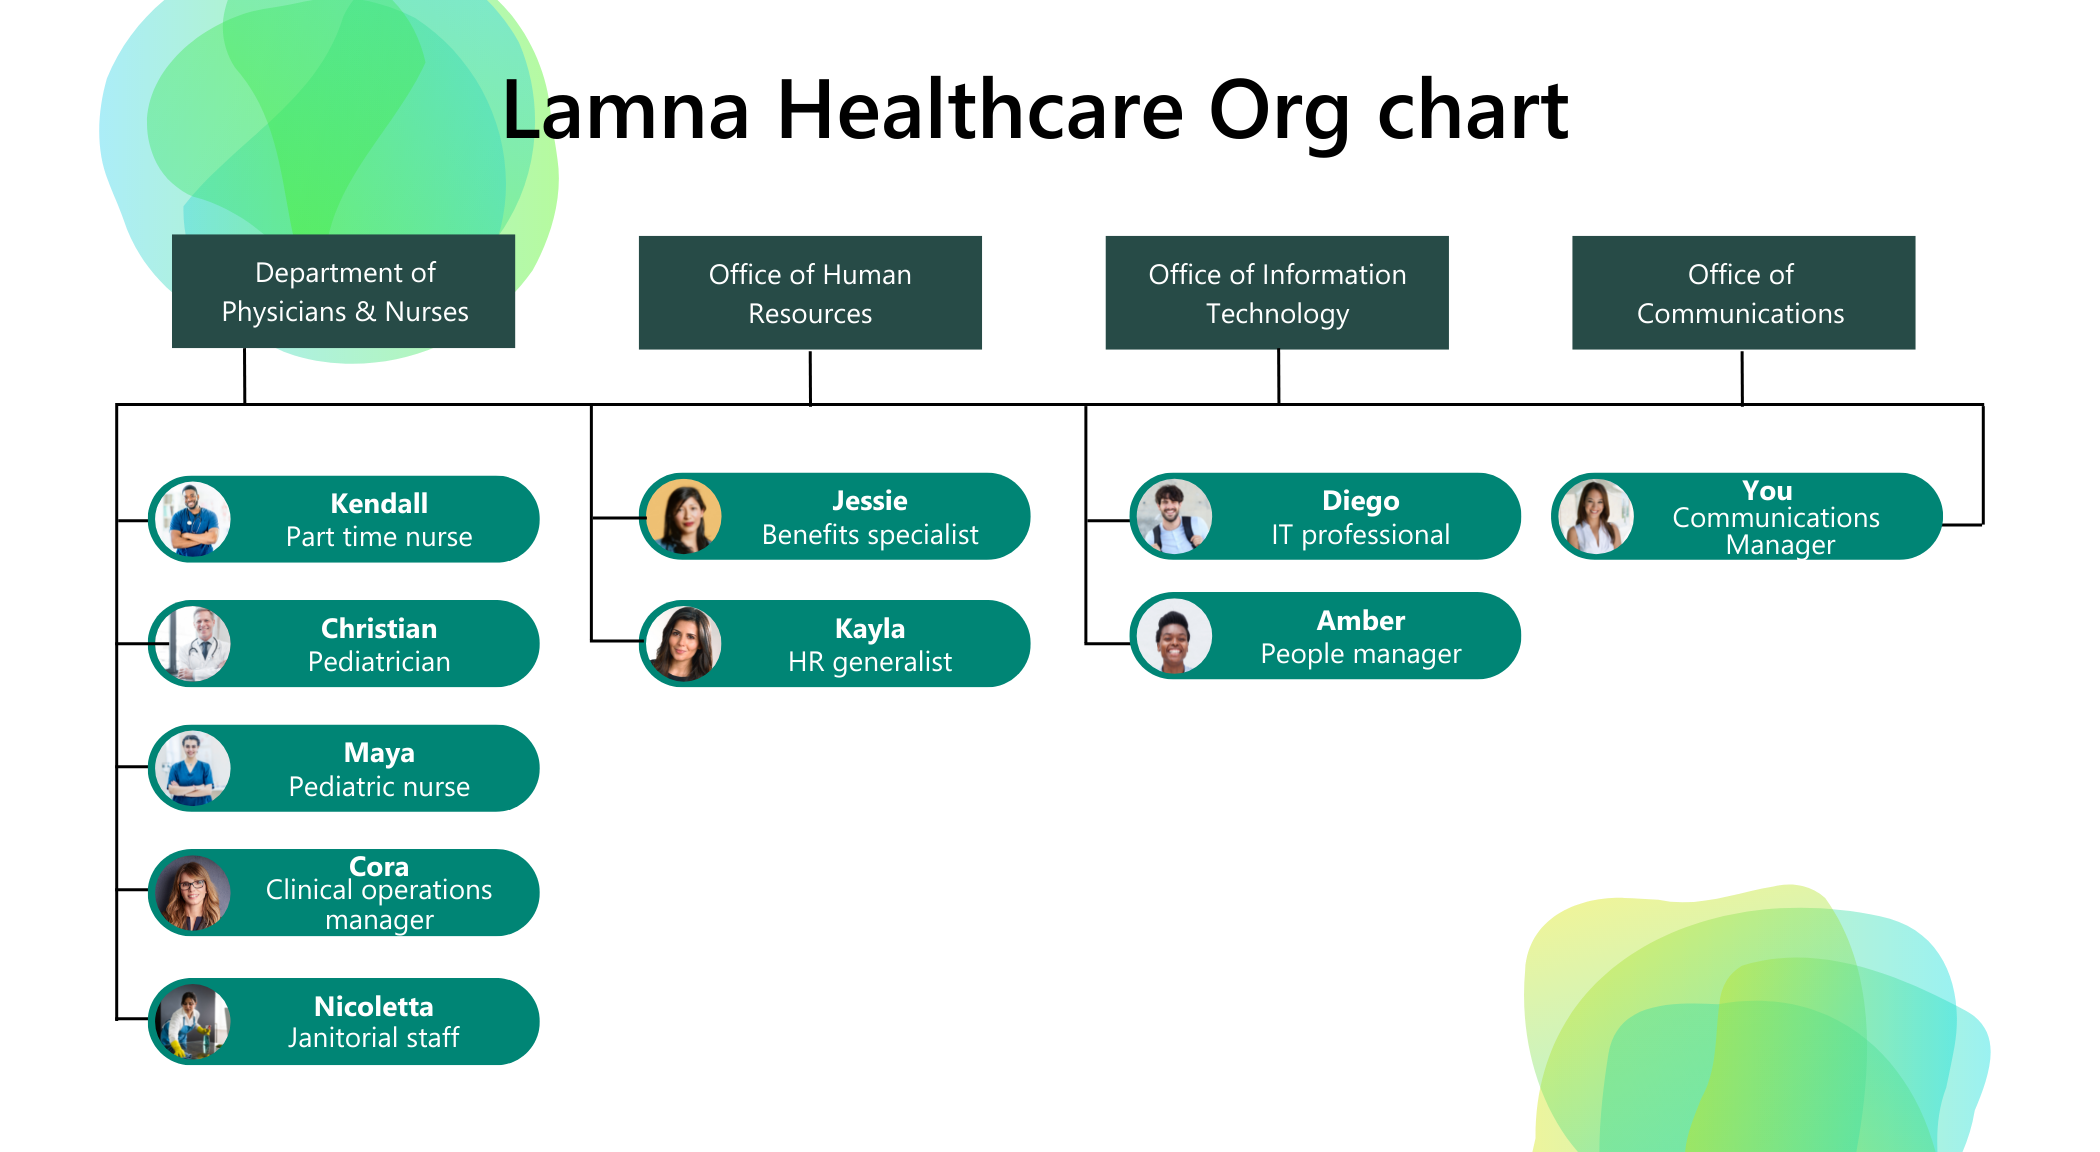 Diagram showing a simplified Lamna Healthcare org structure.